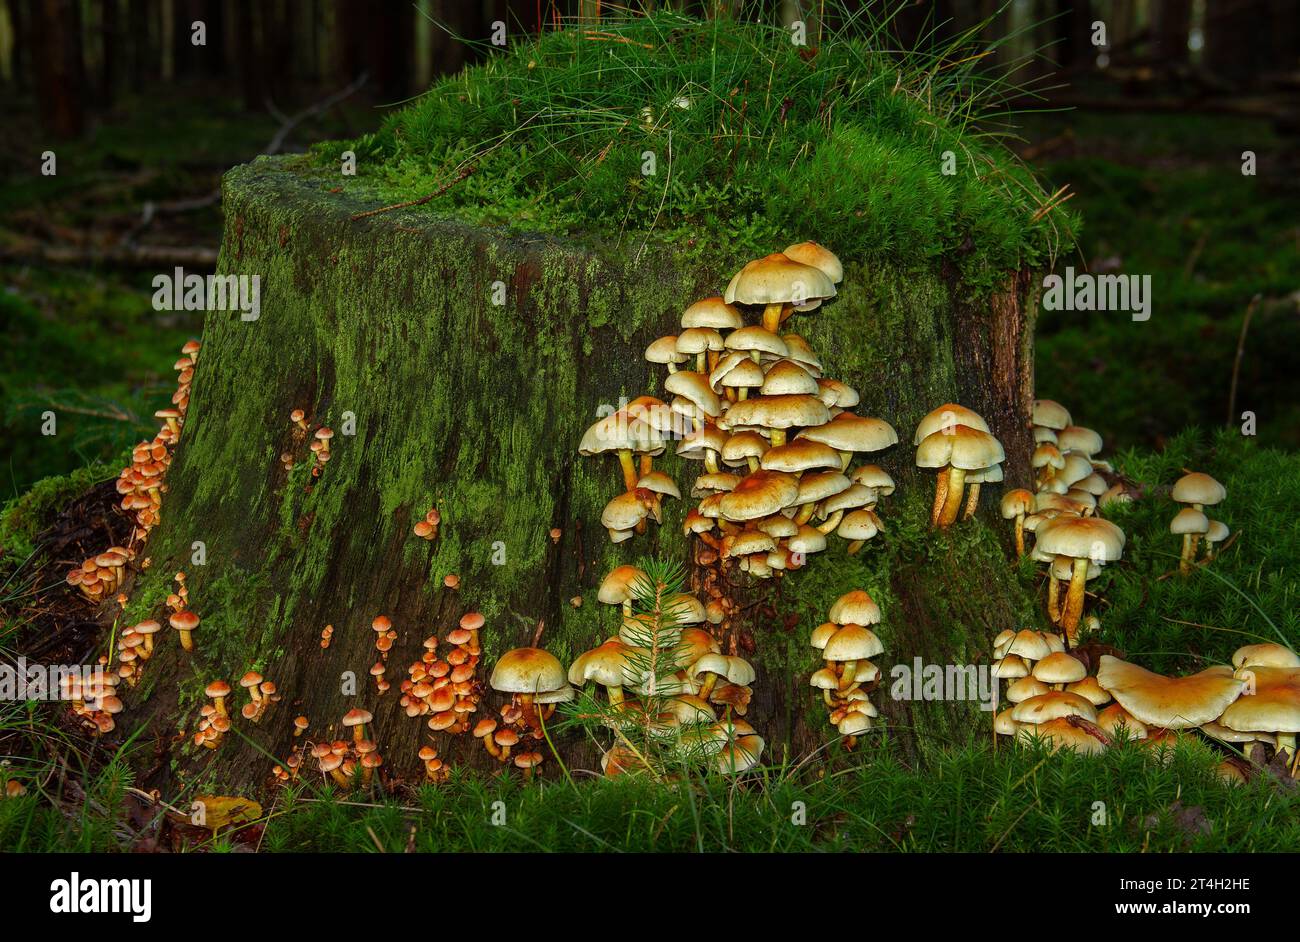 Sulphur tuft and Velvet foot mushrooms growing on the rotting trunk of a pine tree Stock Photo